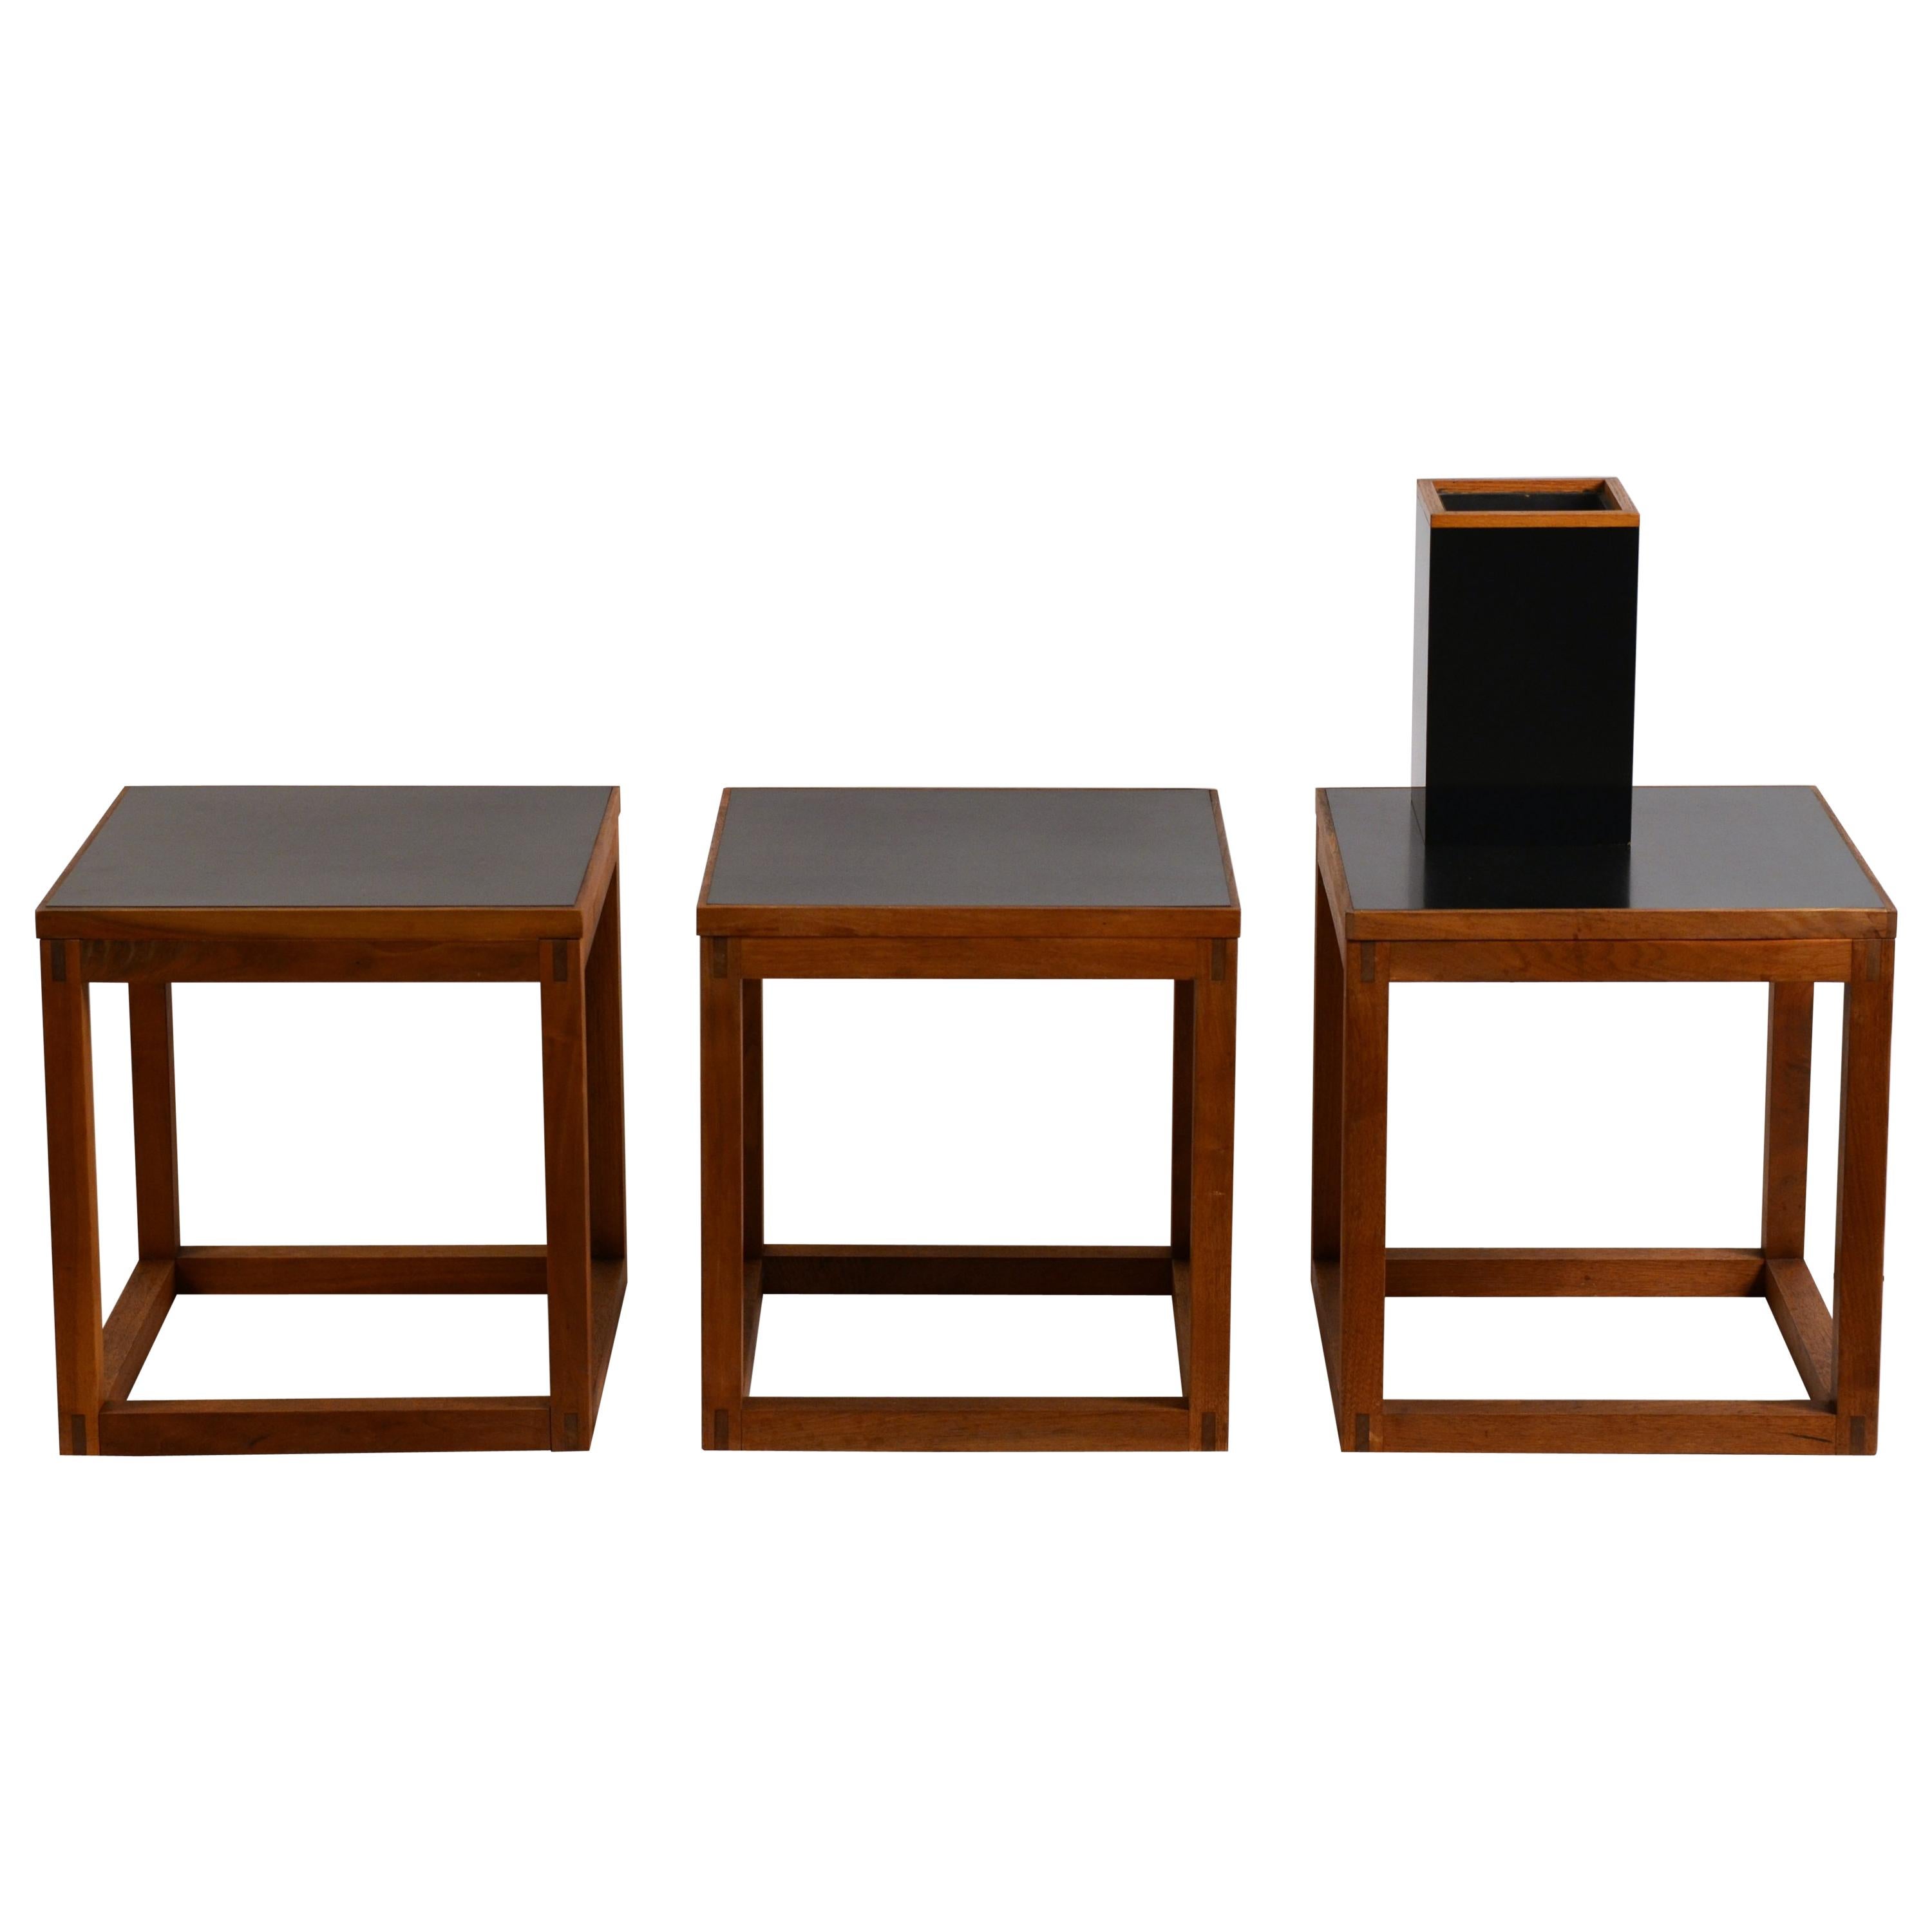 Set of 3 Minimal Teak and Laminate Cube Tables in the Style of Donald Judd